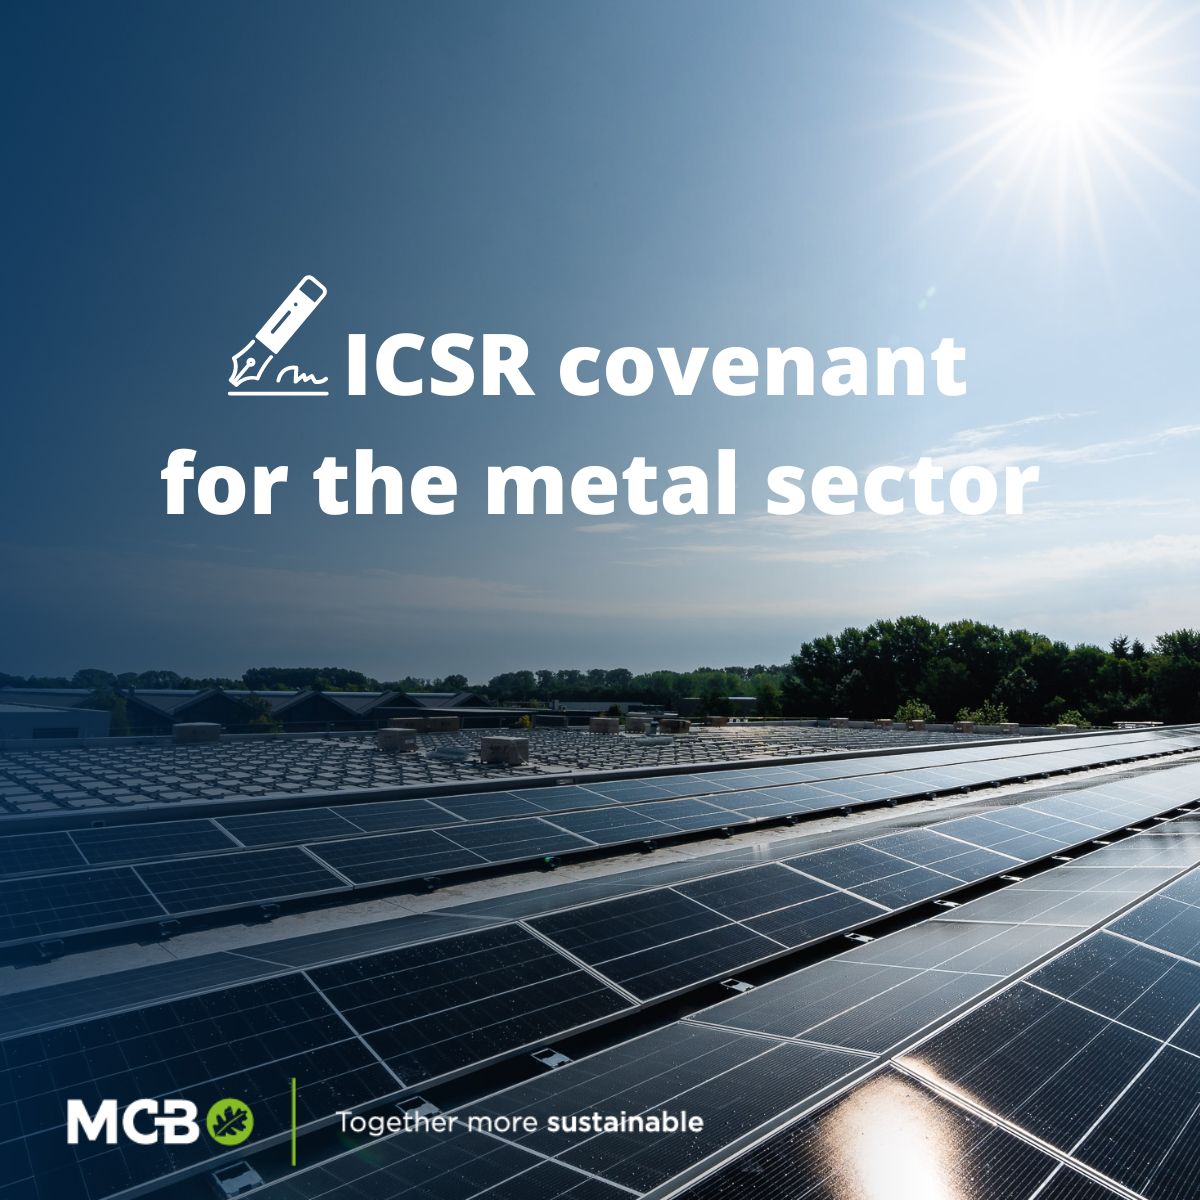 MCB signs CSR covenant for the metal sector